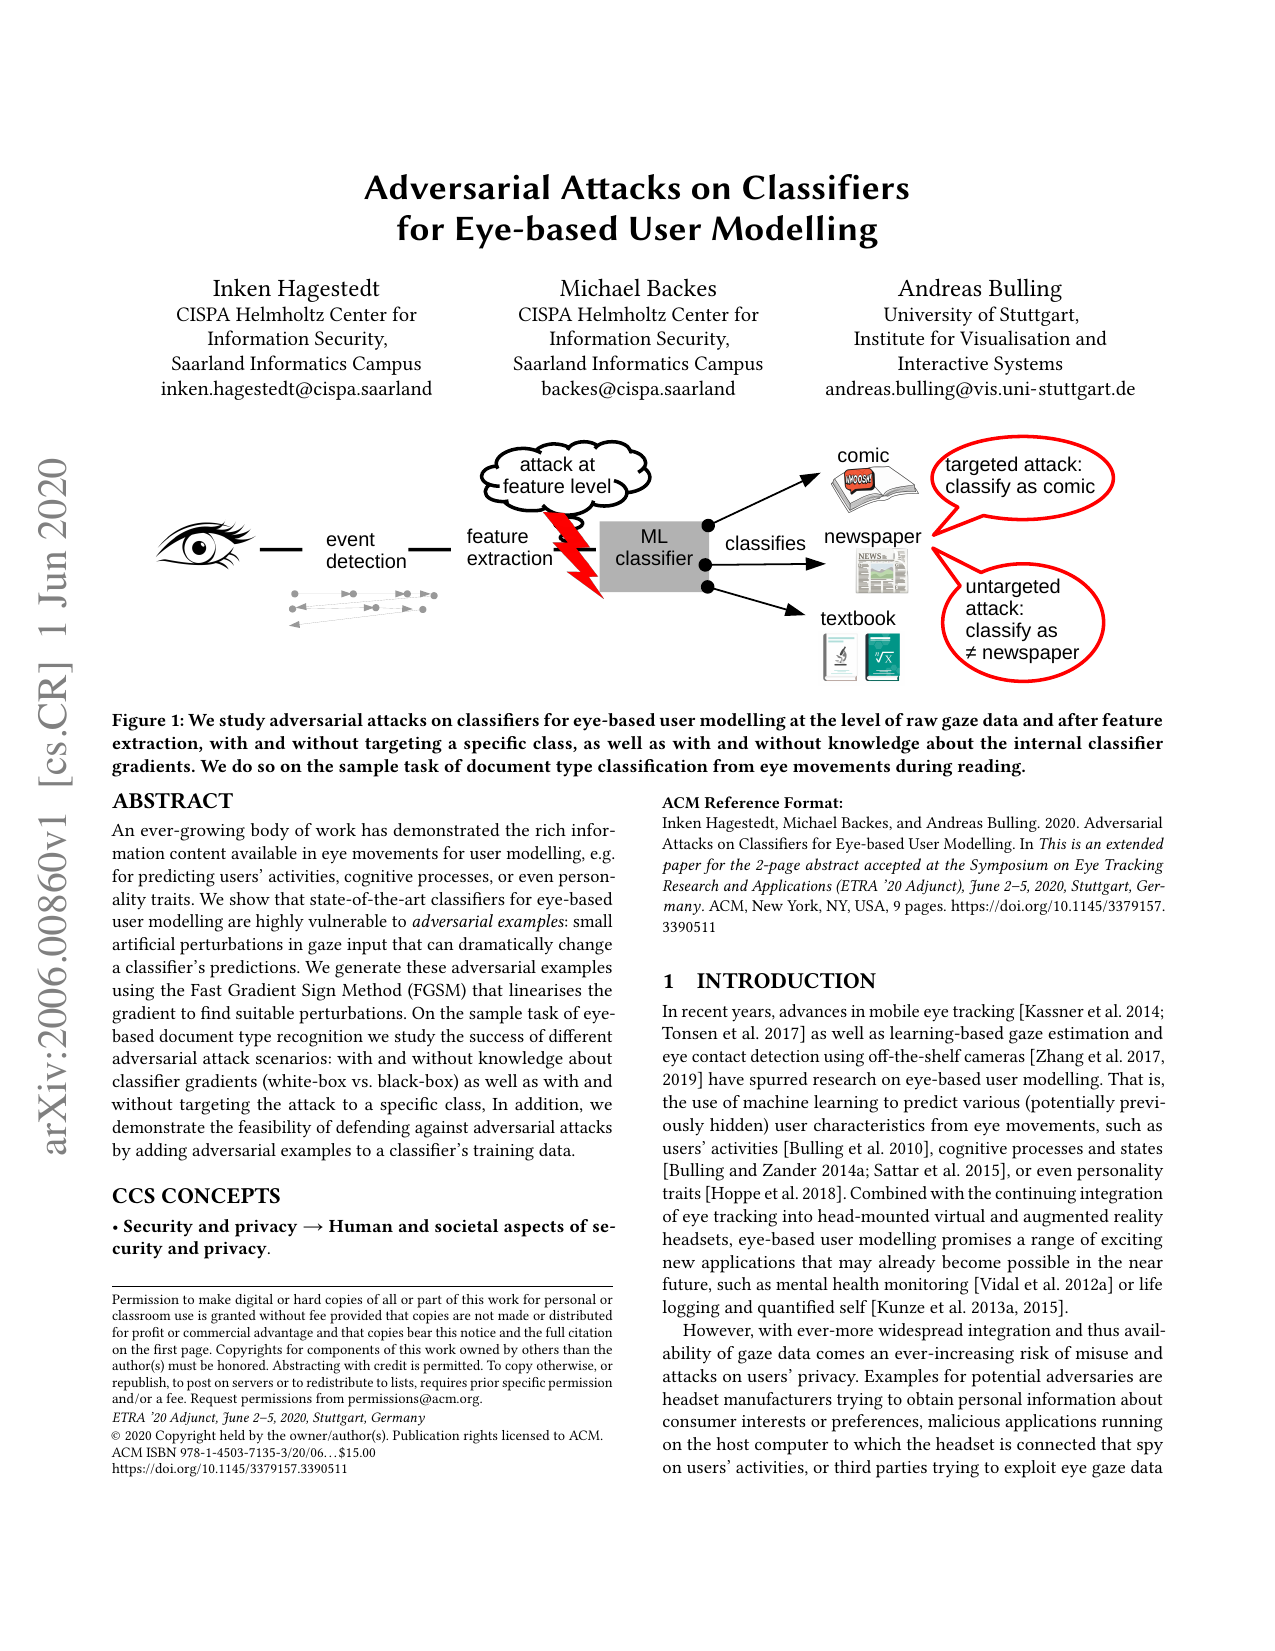 Adversarial Attacks on Classifiers for Eye-based User Modelling